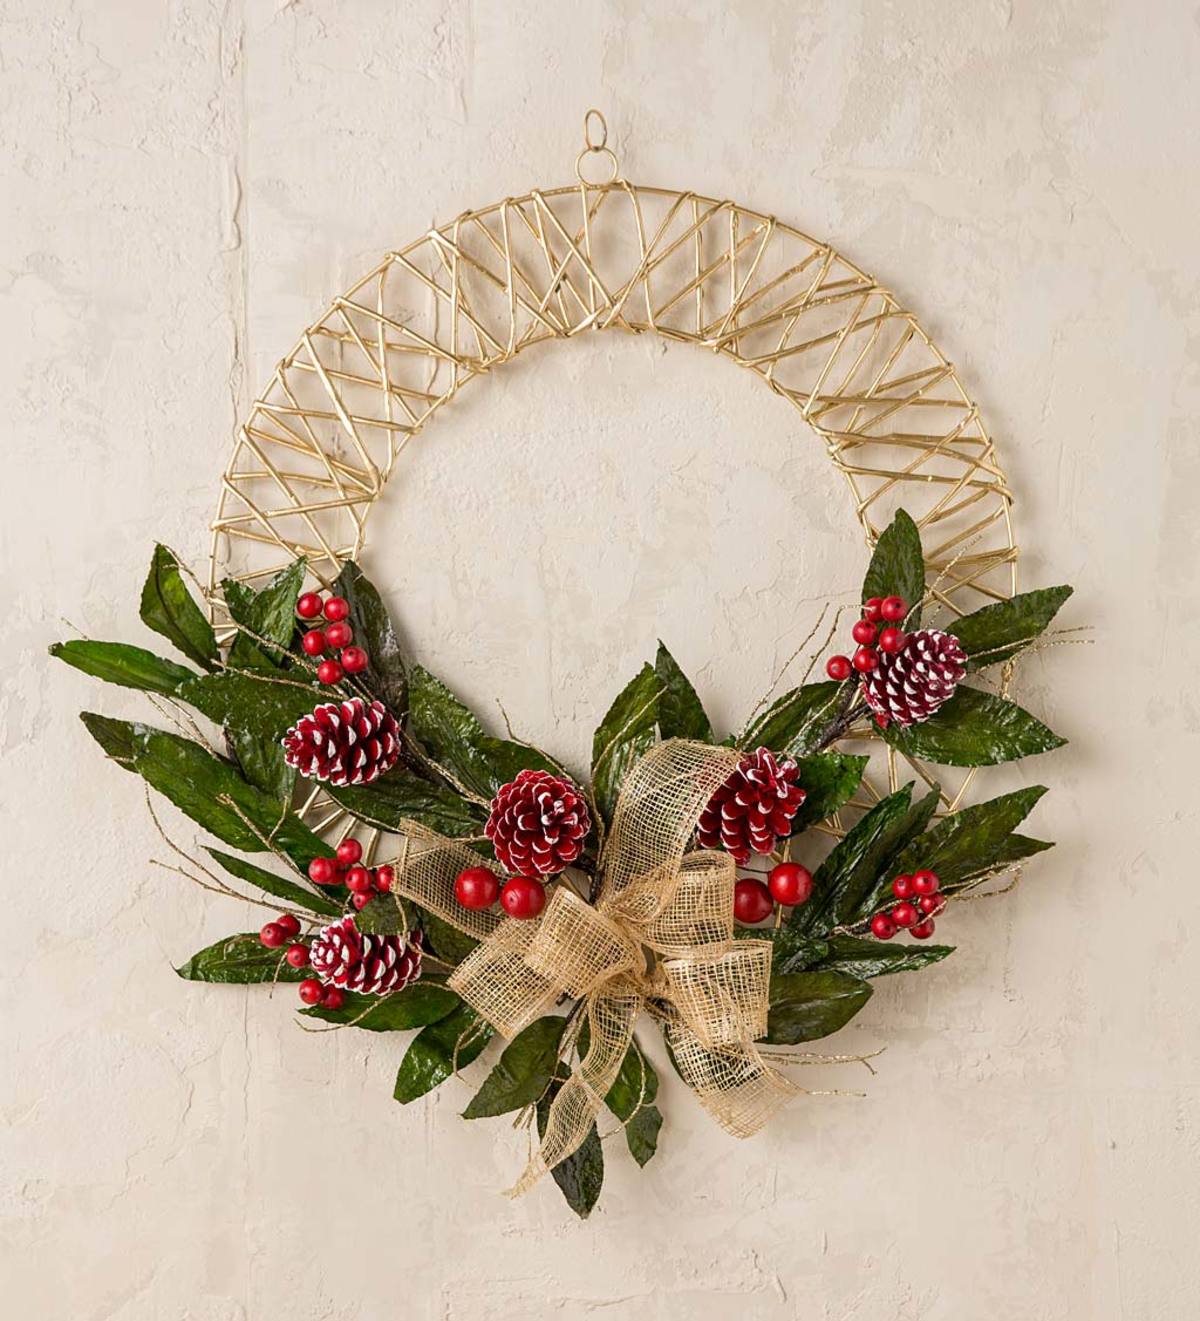 Handcrafted Golden Holiday Wreath with Leaves